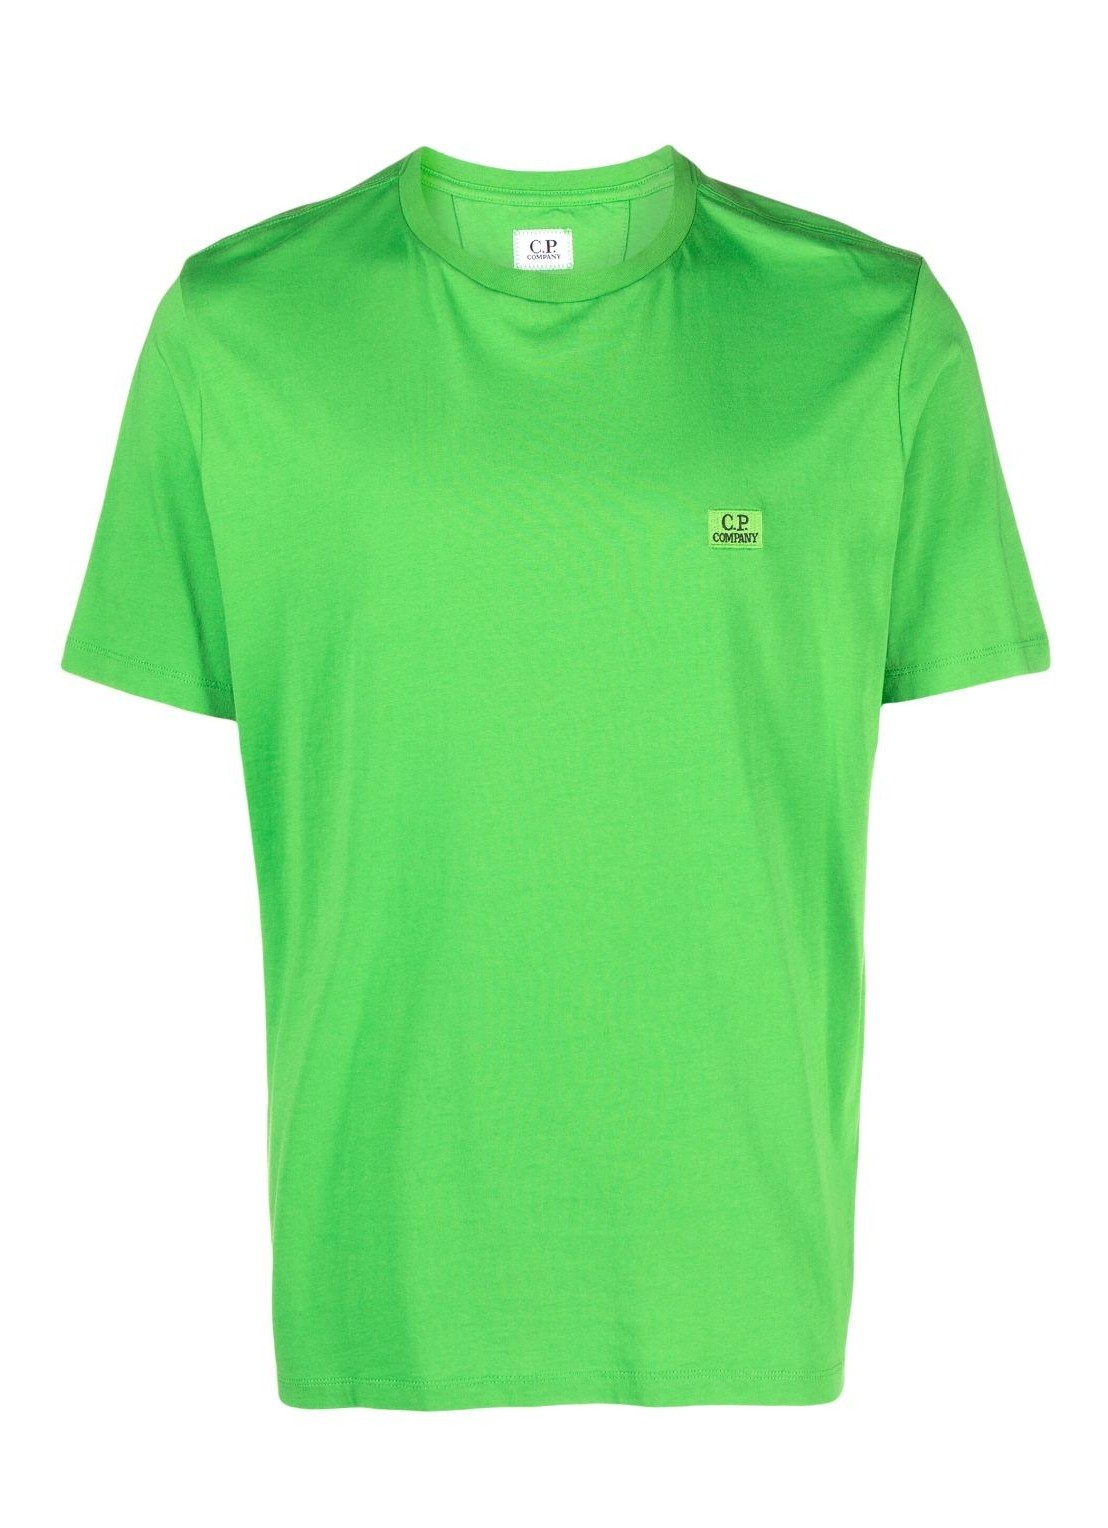 Camiseta c.p.company t-shirt man jersey embroidered logo t-shirt 15cmts068a005100w 617 talla verde
 